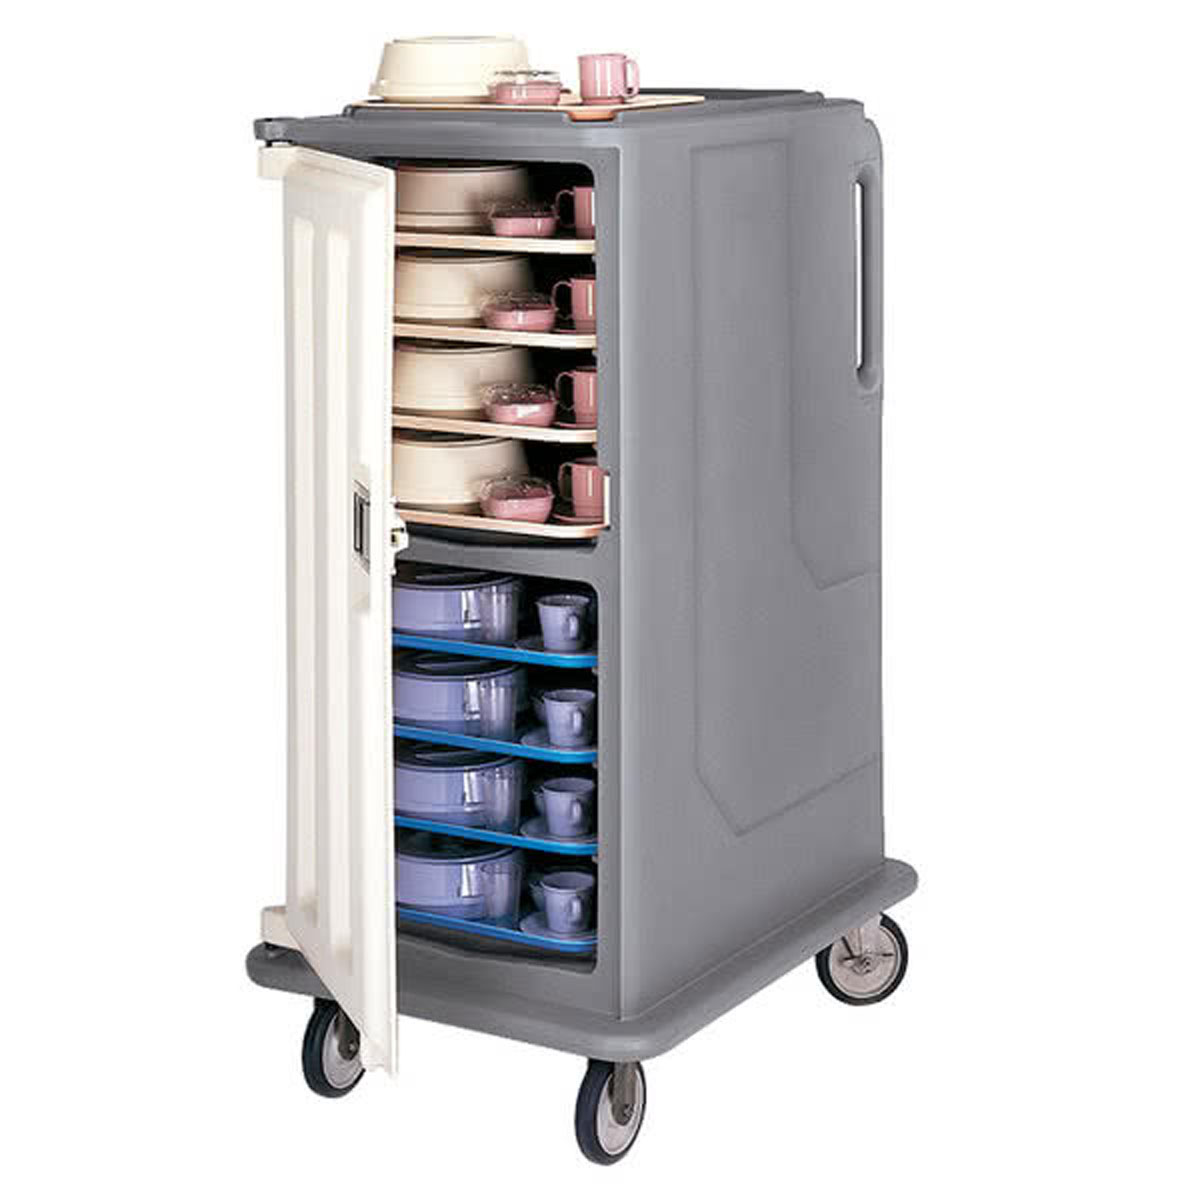 Cambro MDC1520T16191 Meal-Delivery Cart for Tray Service - 2 Compartments for 15'' x 20'' Trays - Tall - Granite Gray w/Cream Doors